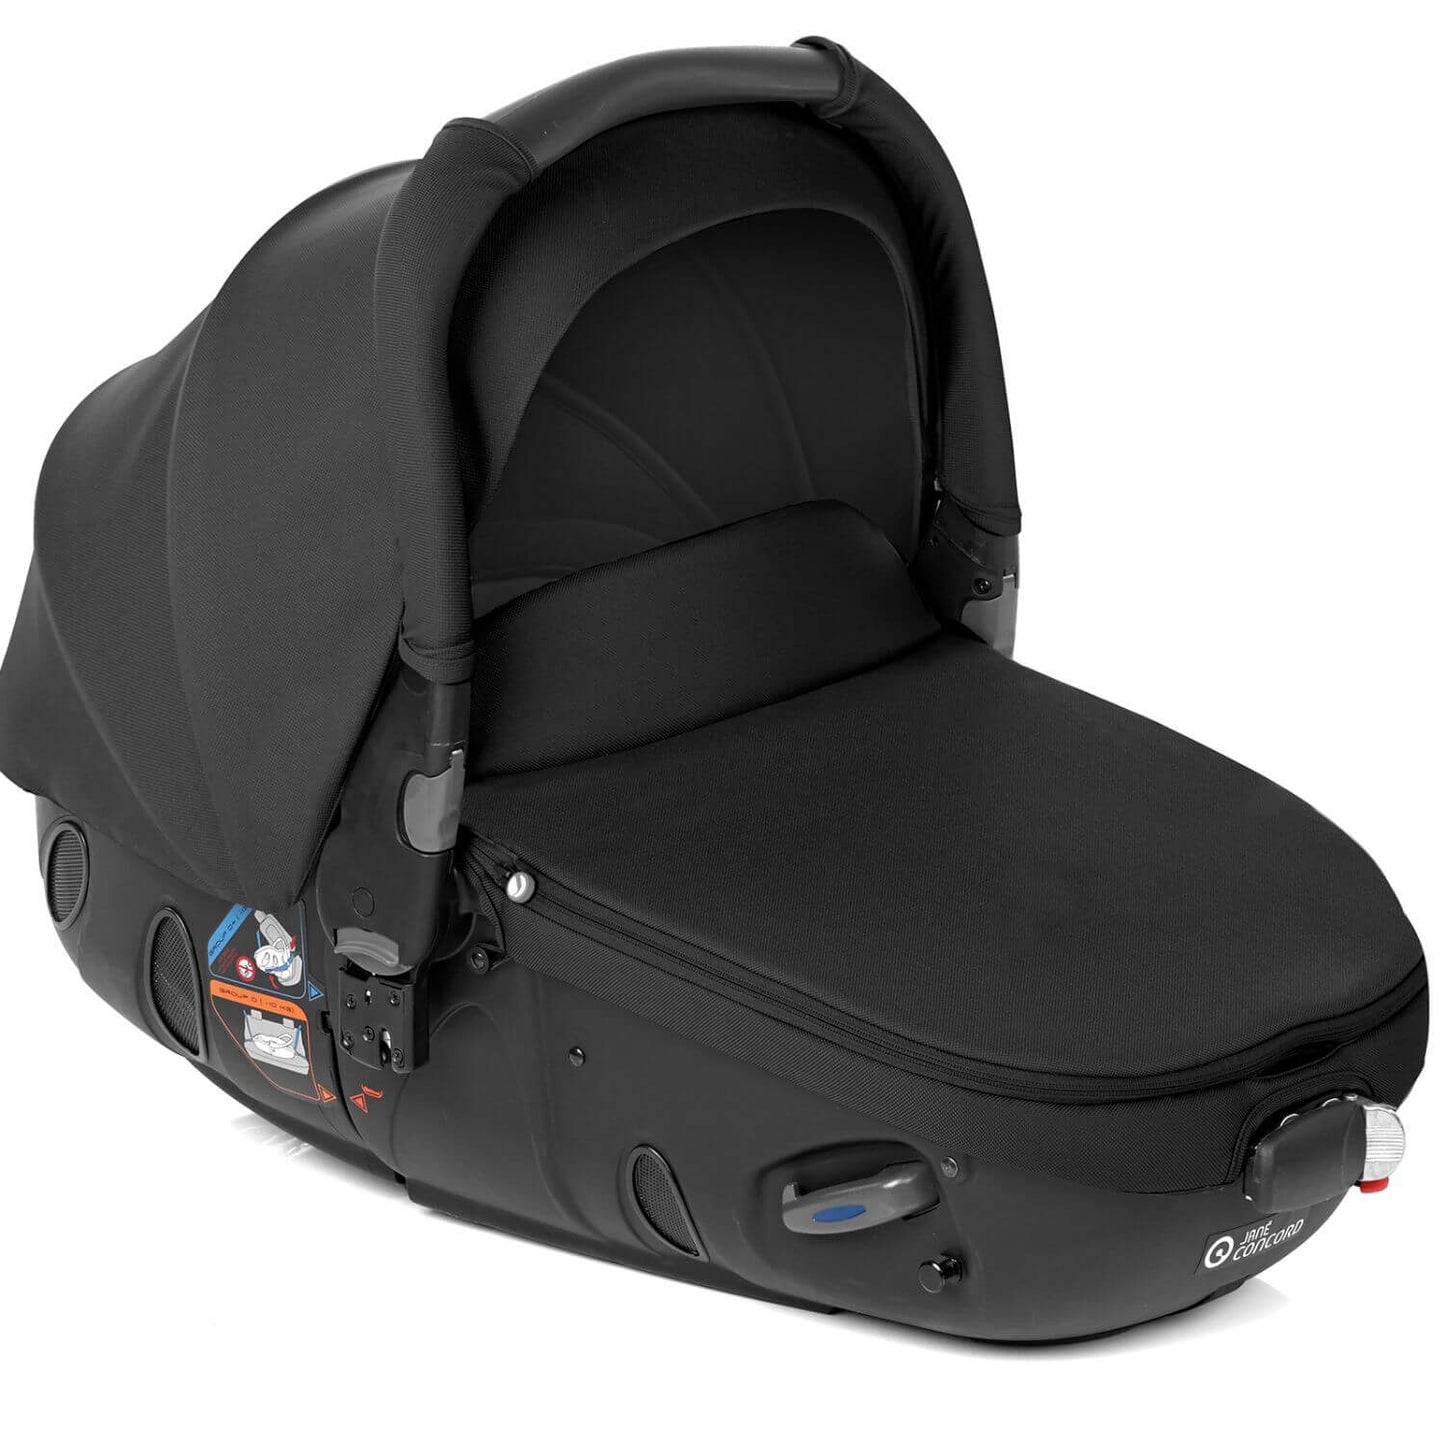 Jané Matrix Light 2 Car Seat - The epitome of safety and comfort